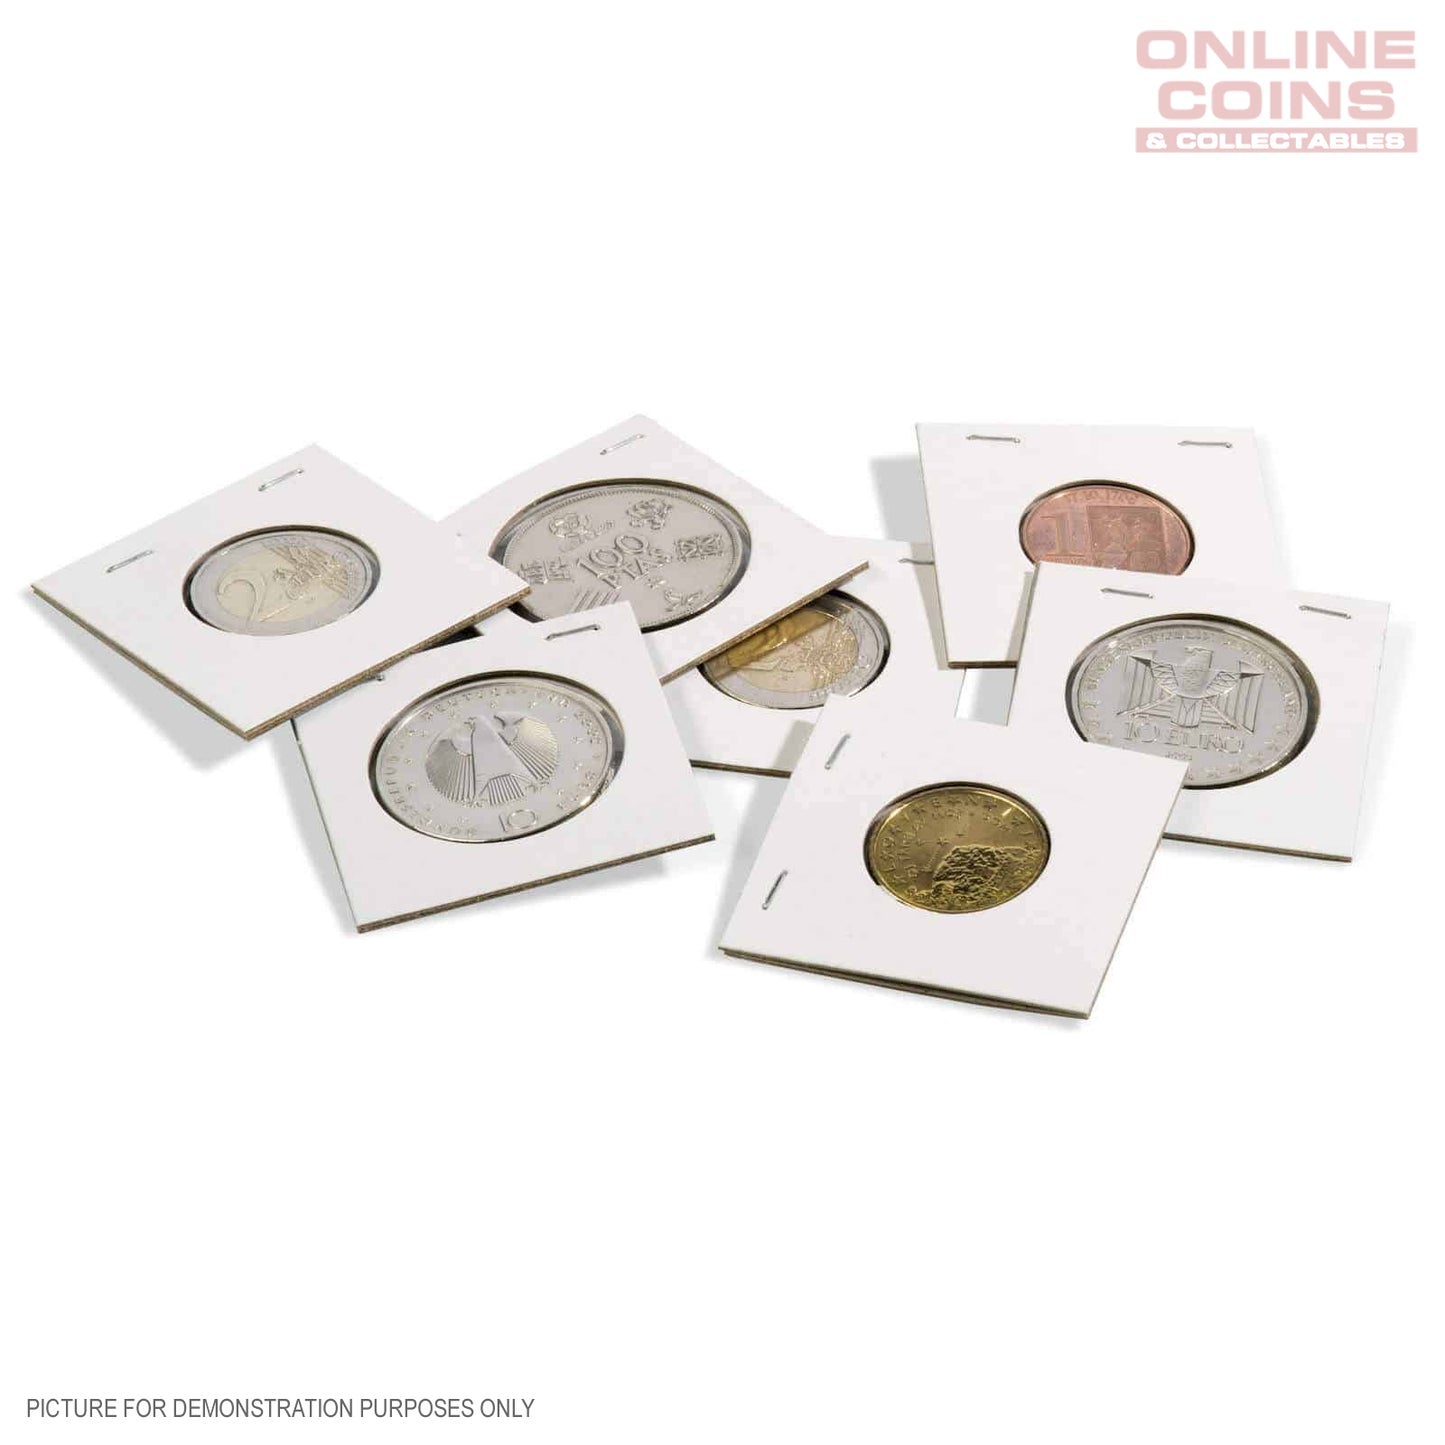 Lighthouse TACK WHITE 17.5mm Staple 2"x2" Coin Holders (Suitable For Australian Threepence Coins)